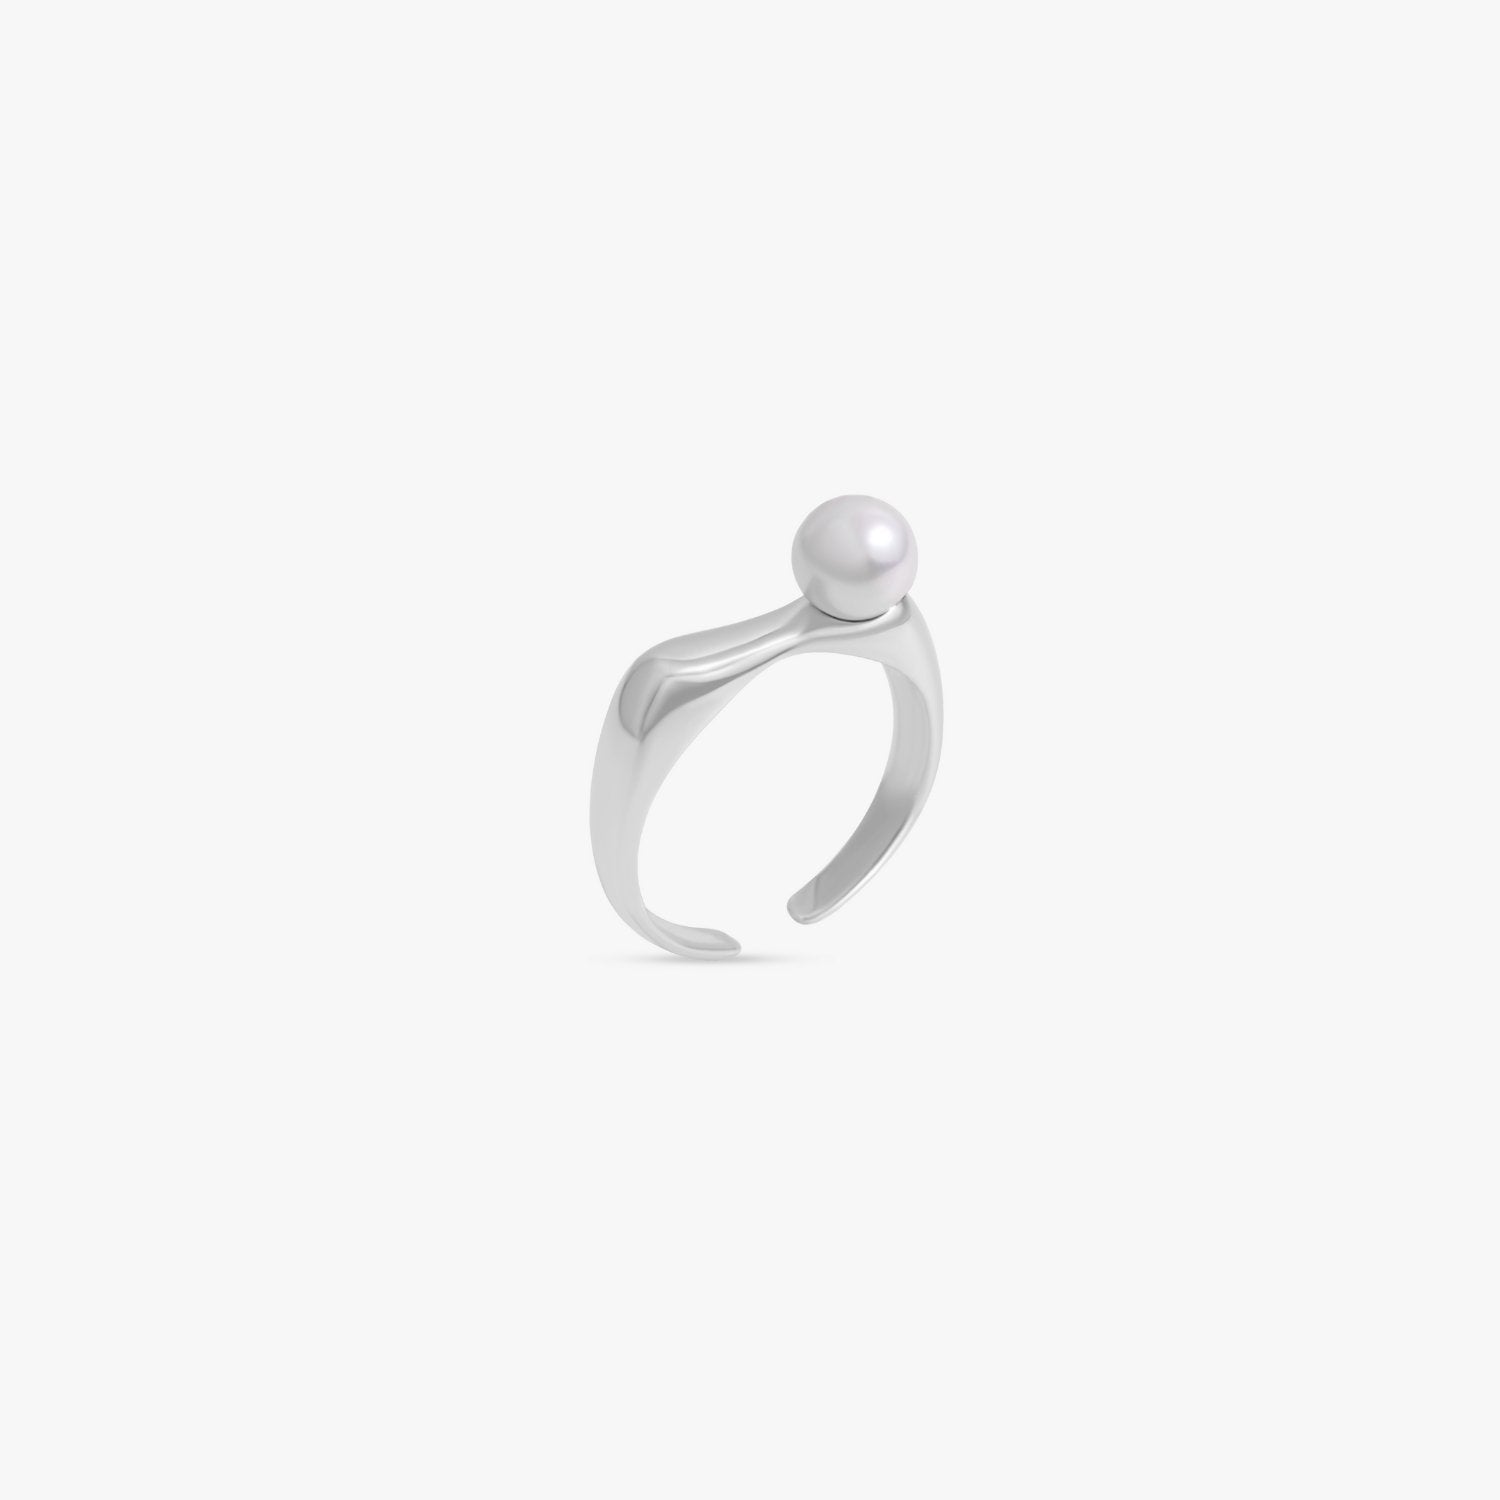 Pearl Adjustable Sterling Silver Ring - Flaire & Co.